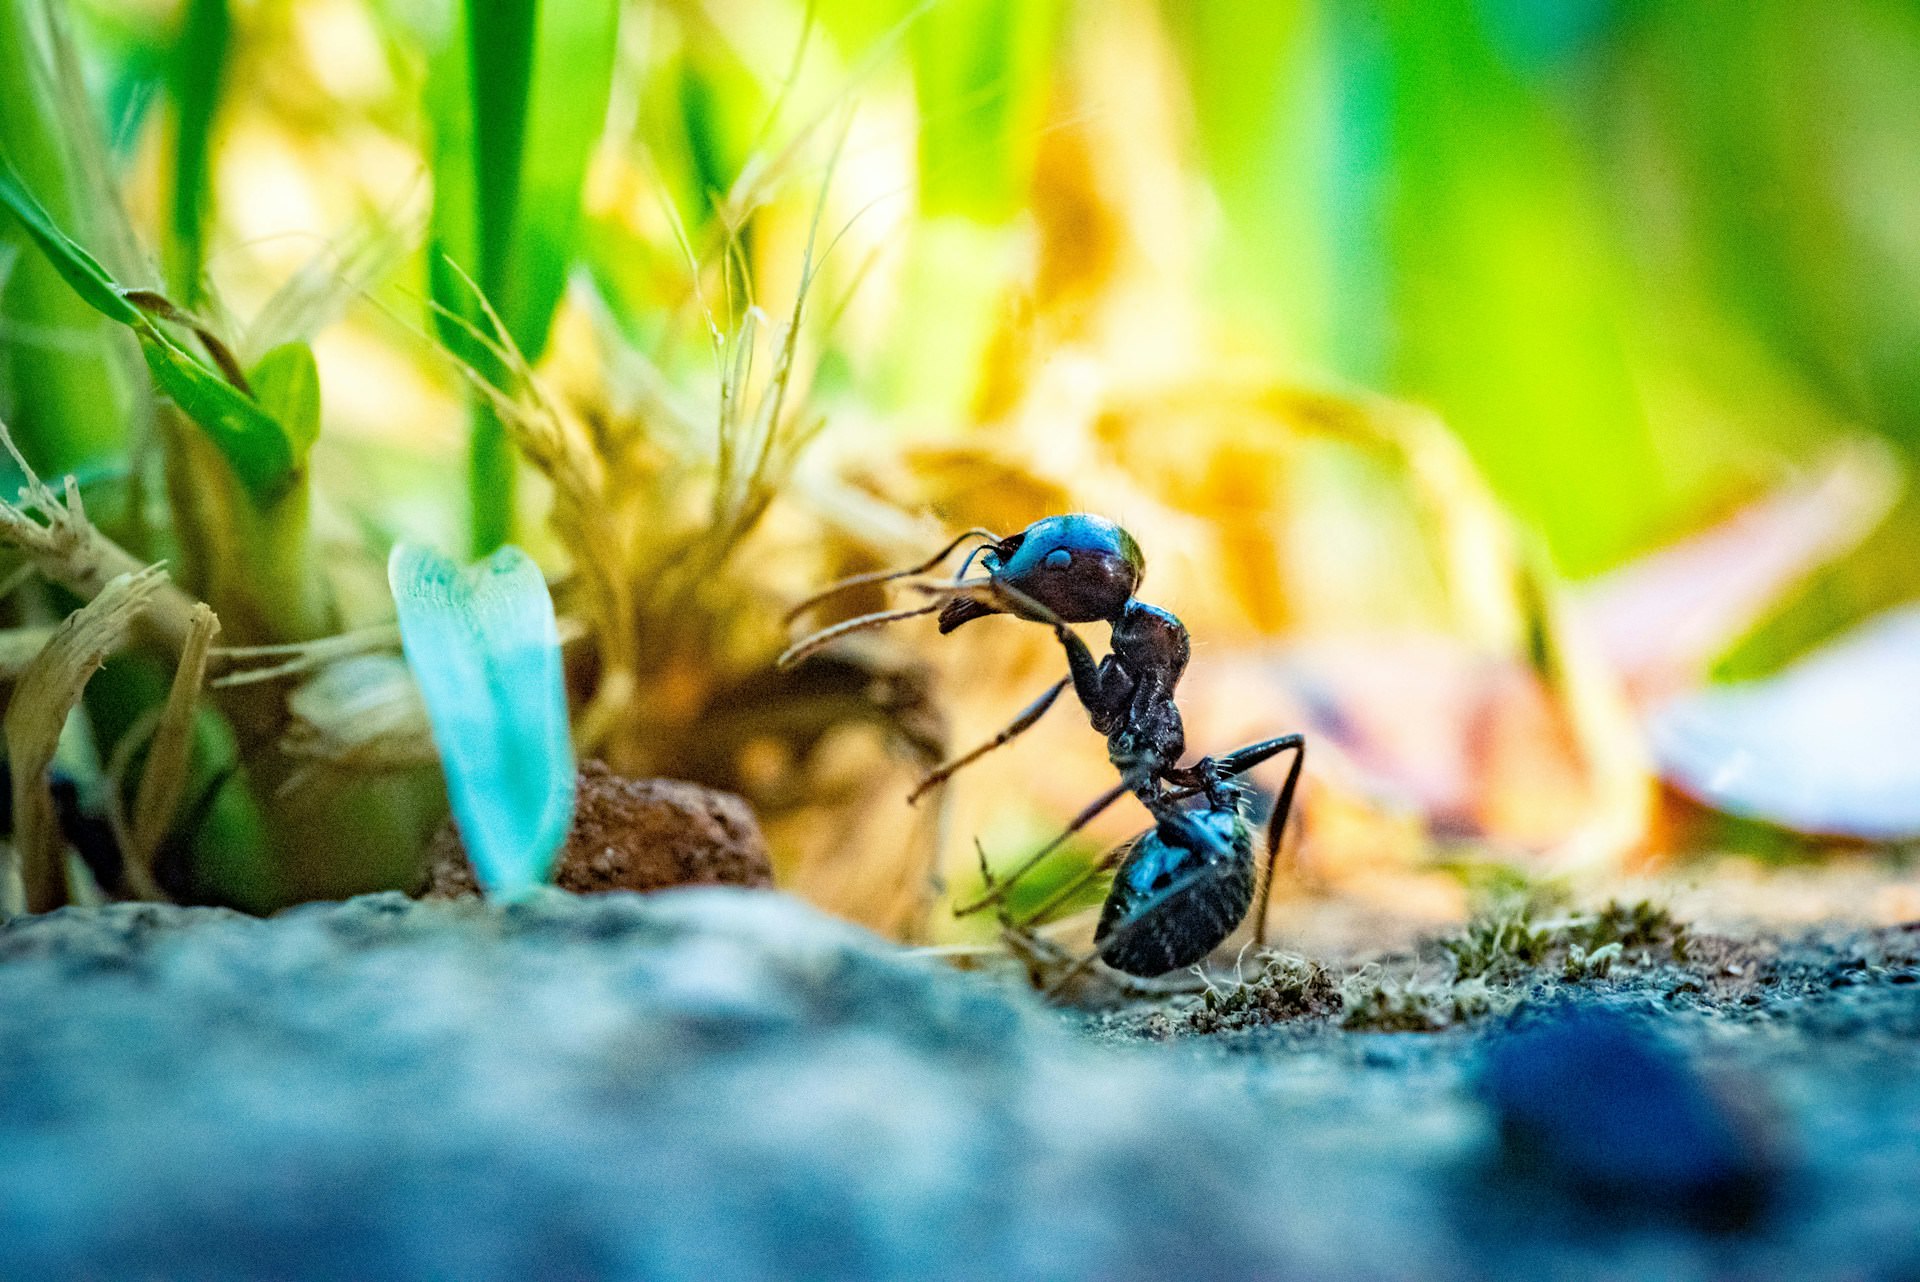 The Saharan silver ant is the world's fastest ant, capable of running at speeds equivalent to 3 kilometers per hour (1.86 miles per hour). This incredible speed allows them to evade predators and survive in the scorching desert heat.